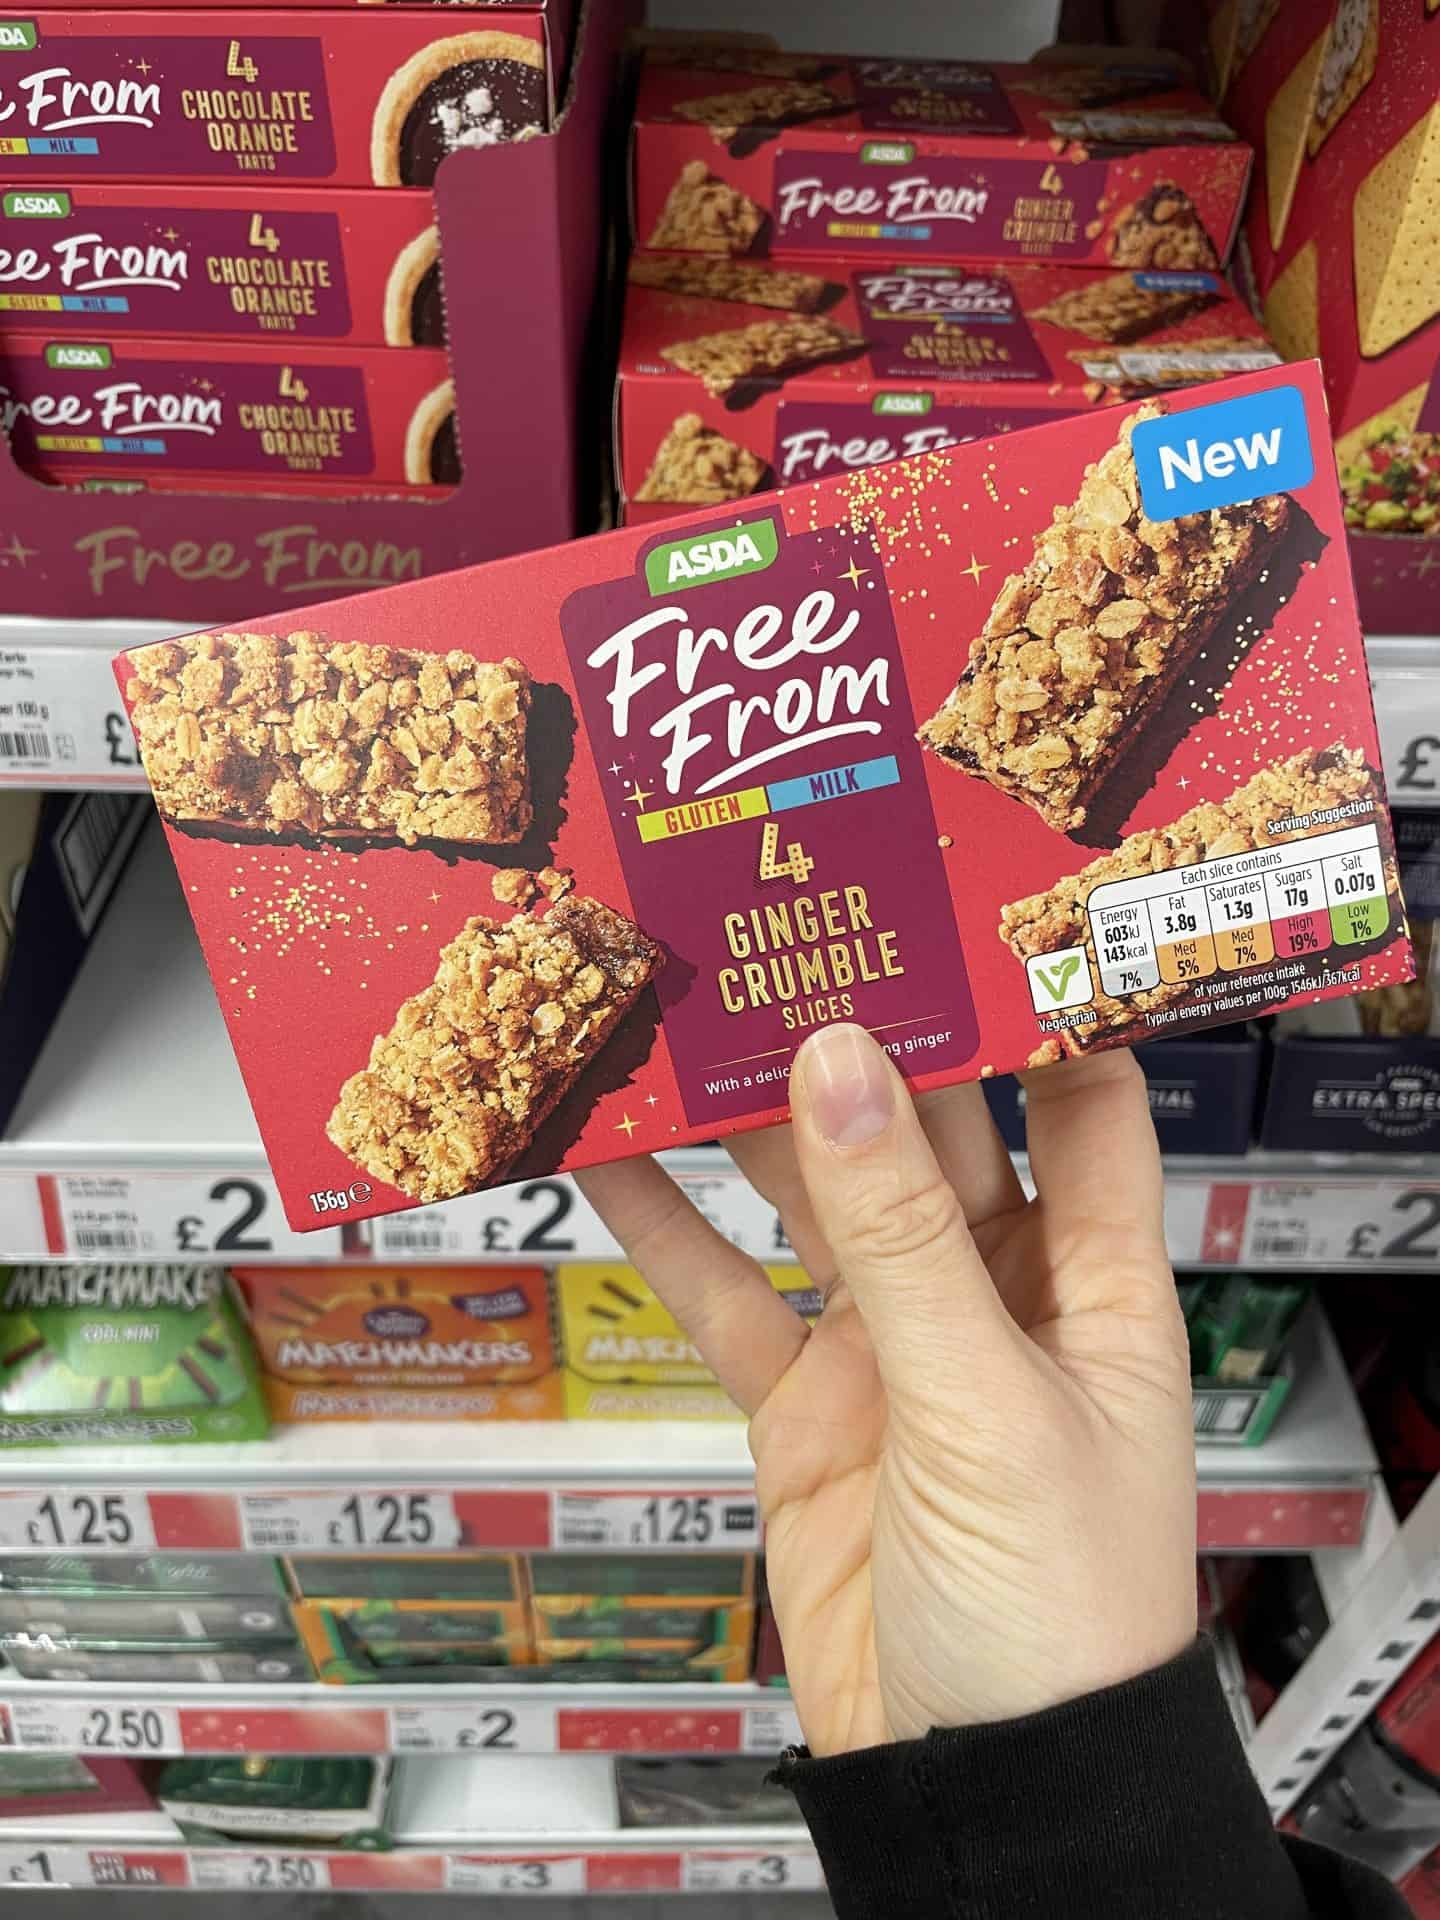 Asda Free From Ginger Crumble Slices